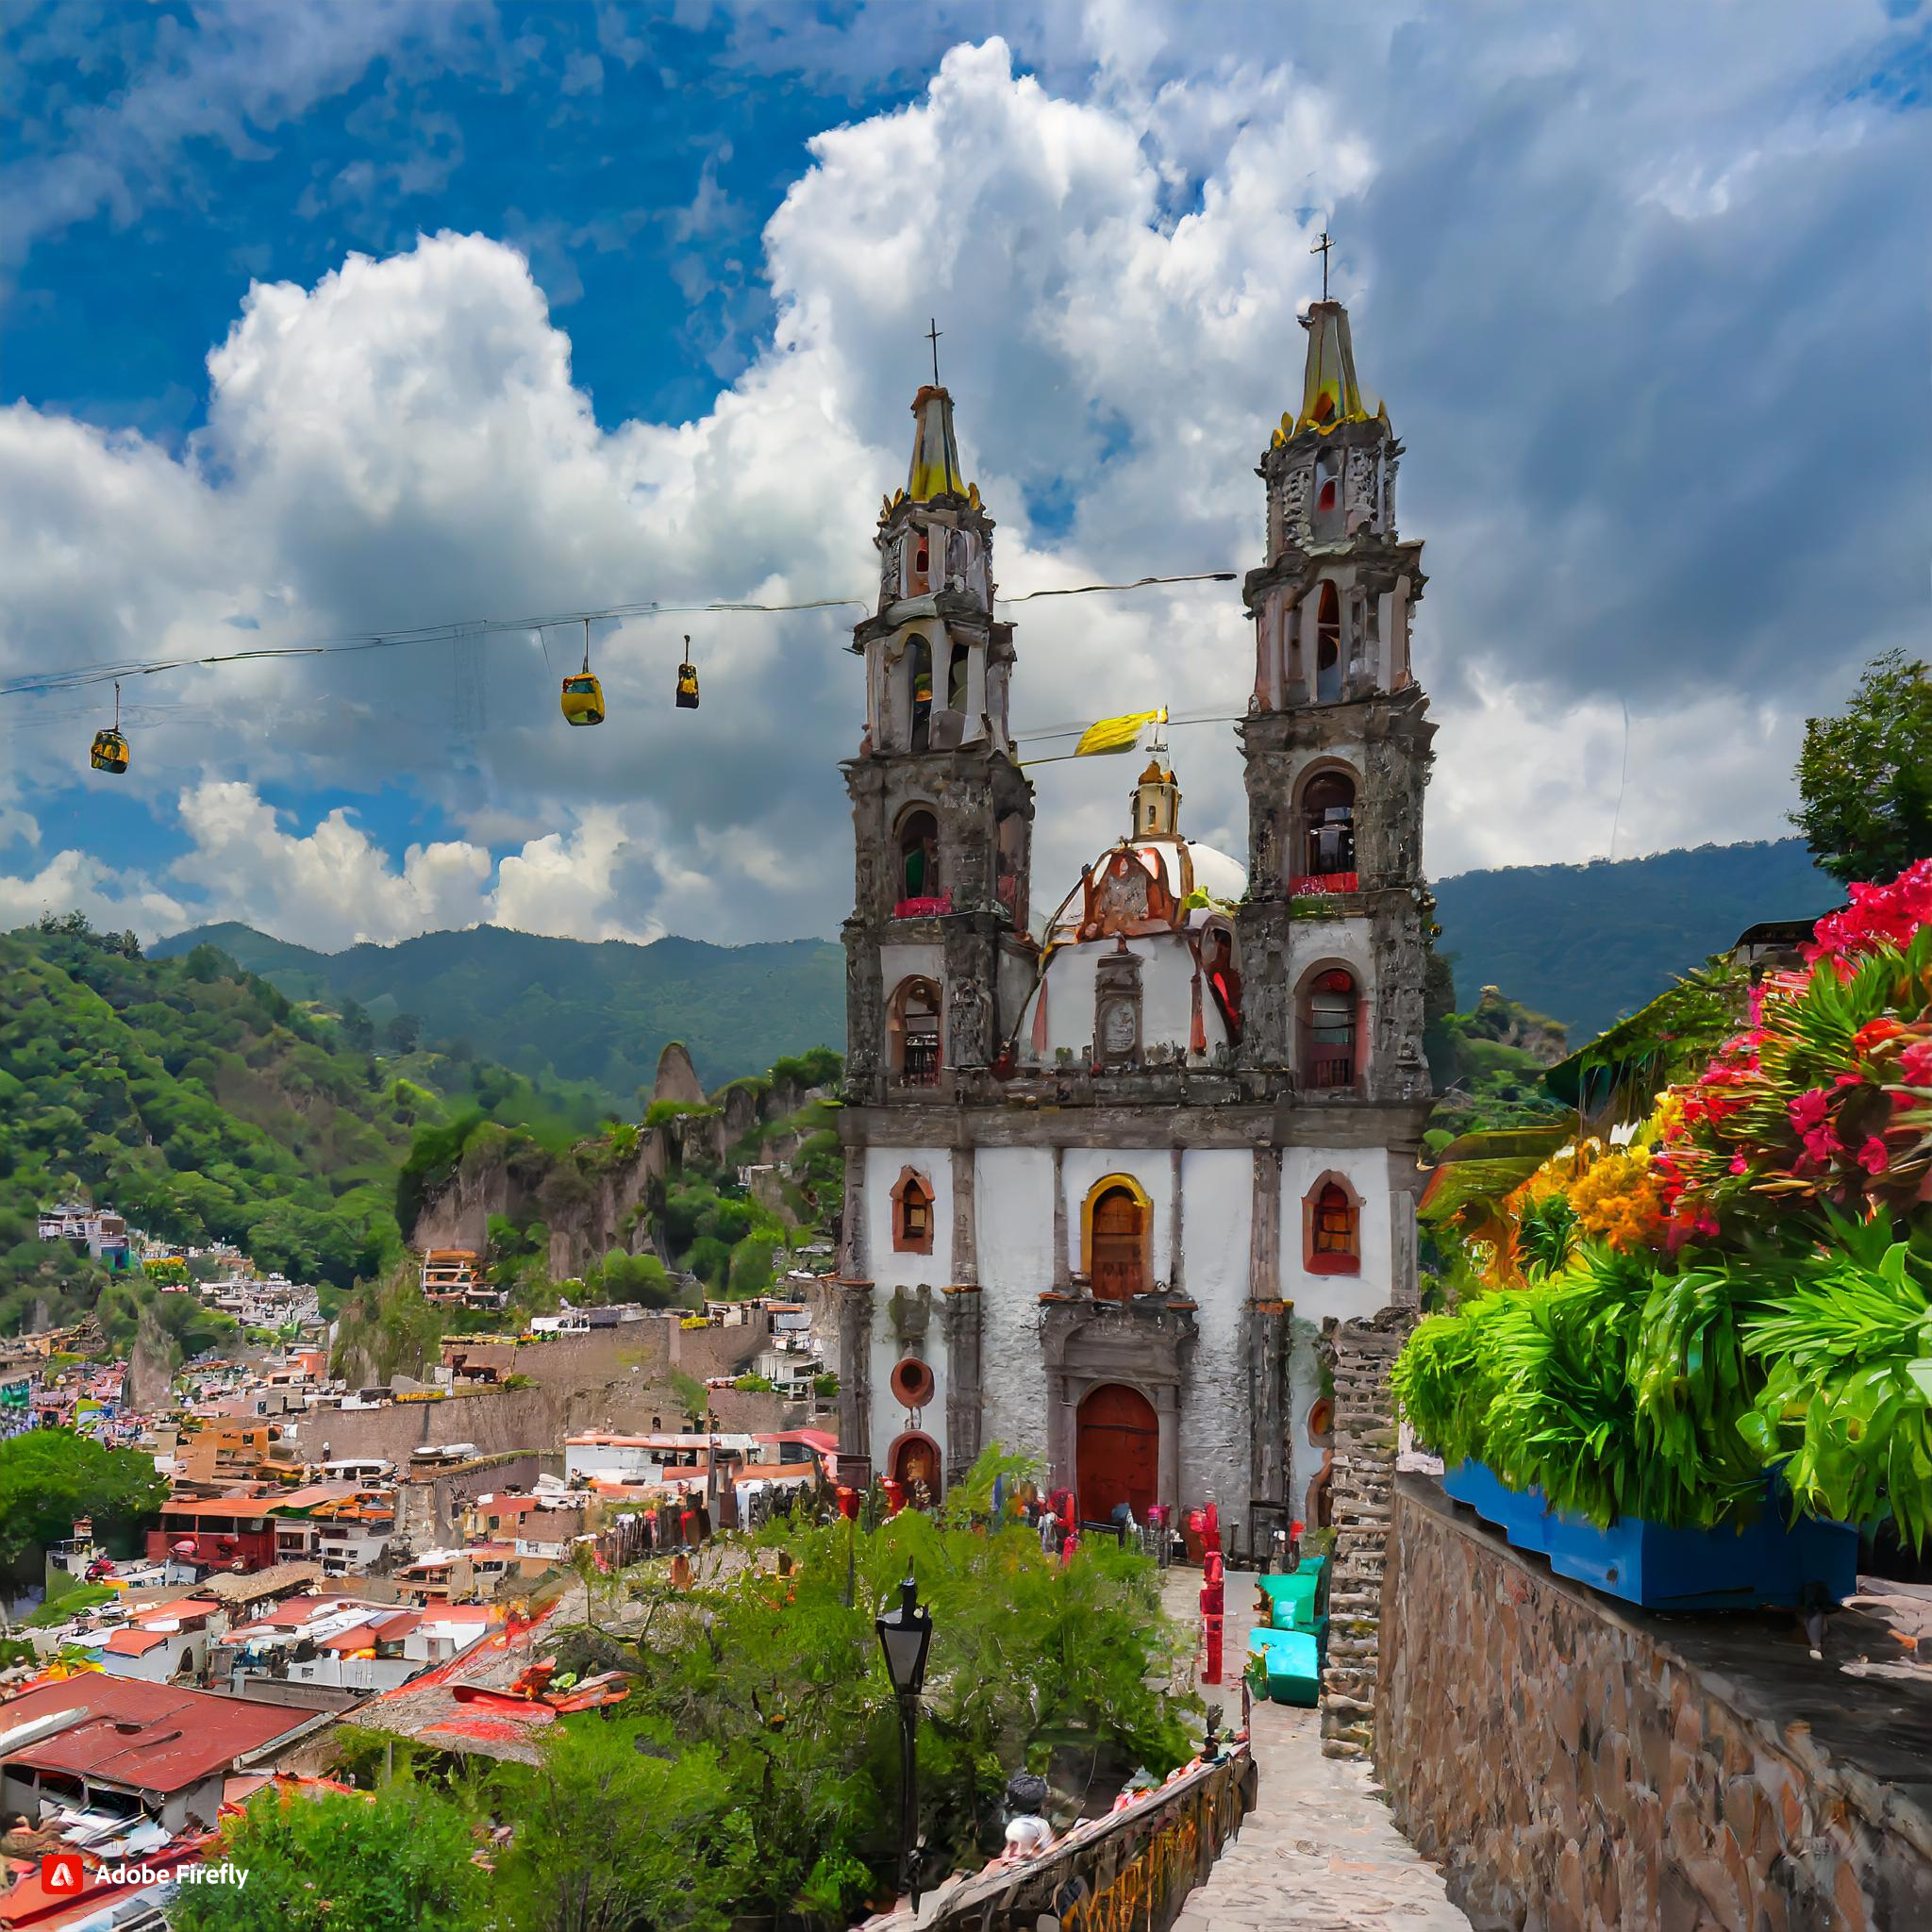  Firefly taxco, guerrero, mexico, surreal landscape, beautiful grand cathedral, cloudy sunny sky, sky.jpg